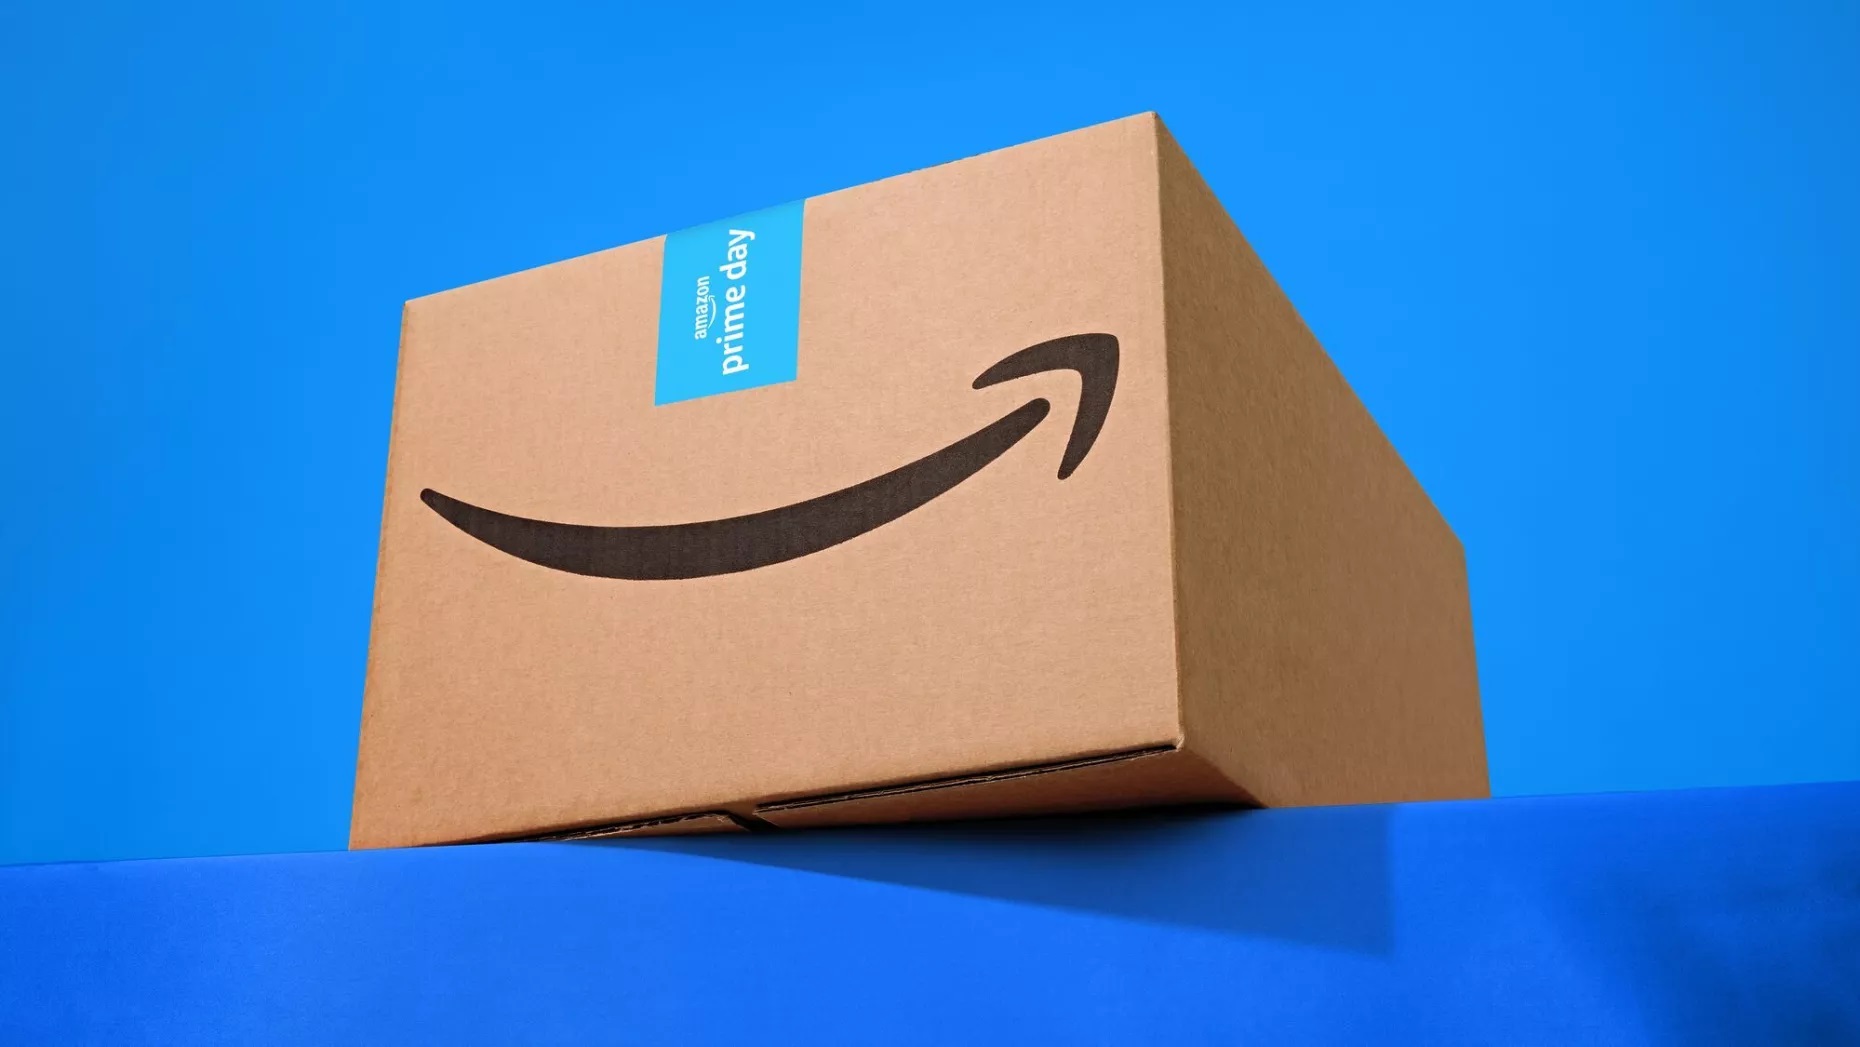 When is the next Amazon Prime Day?